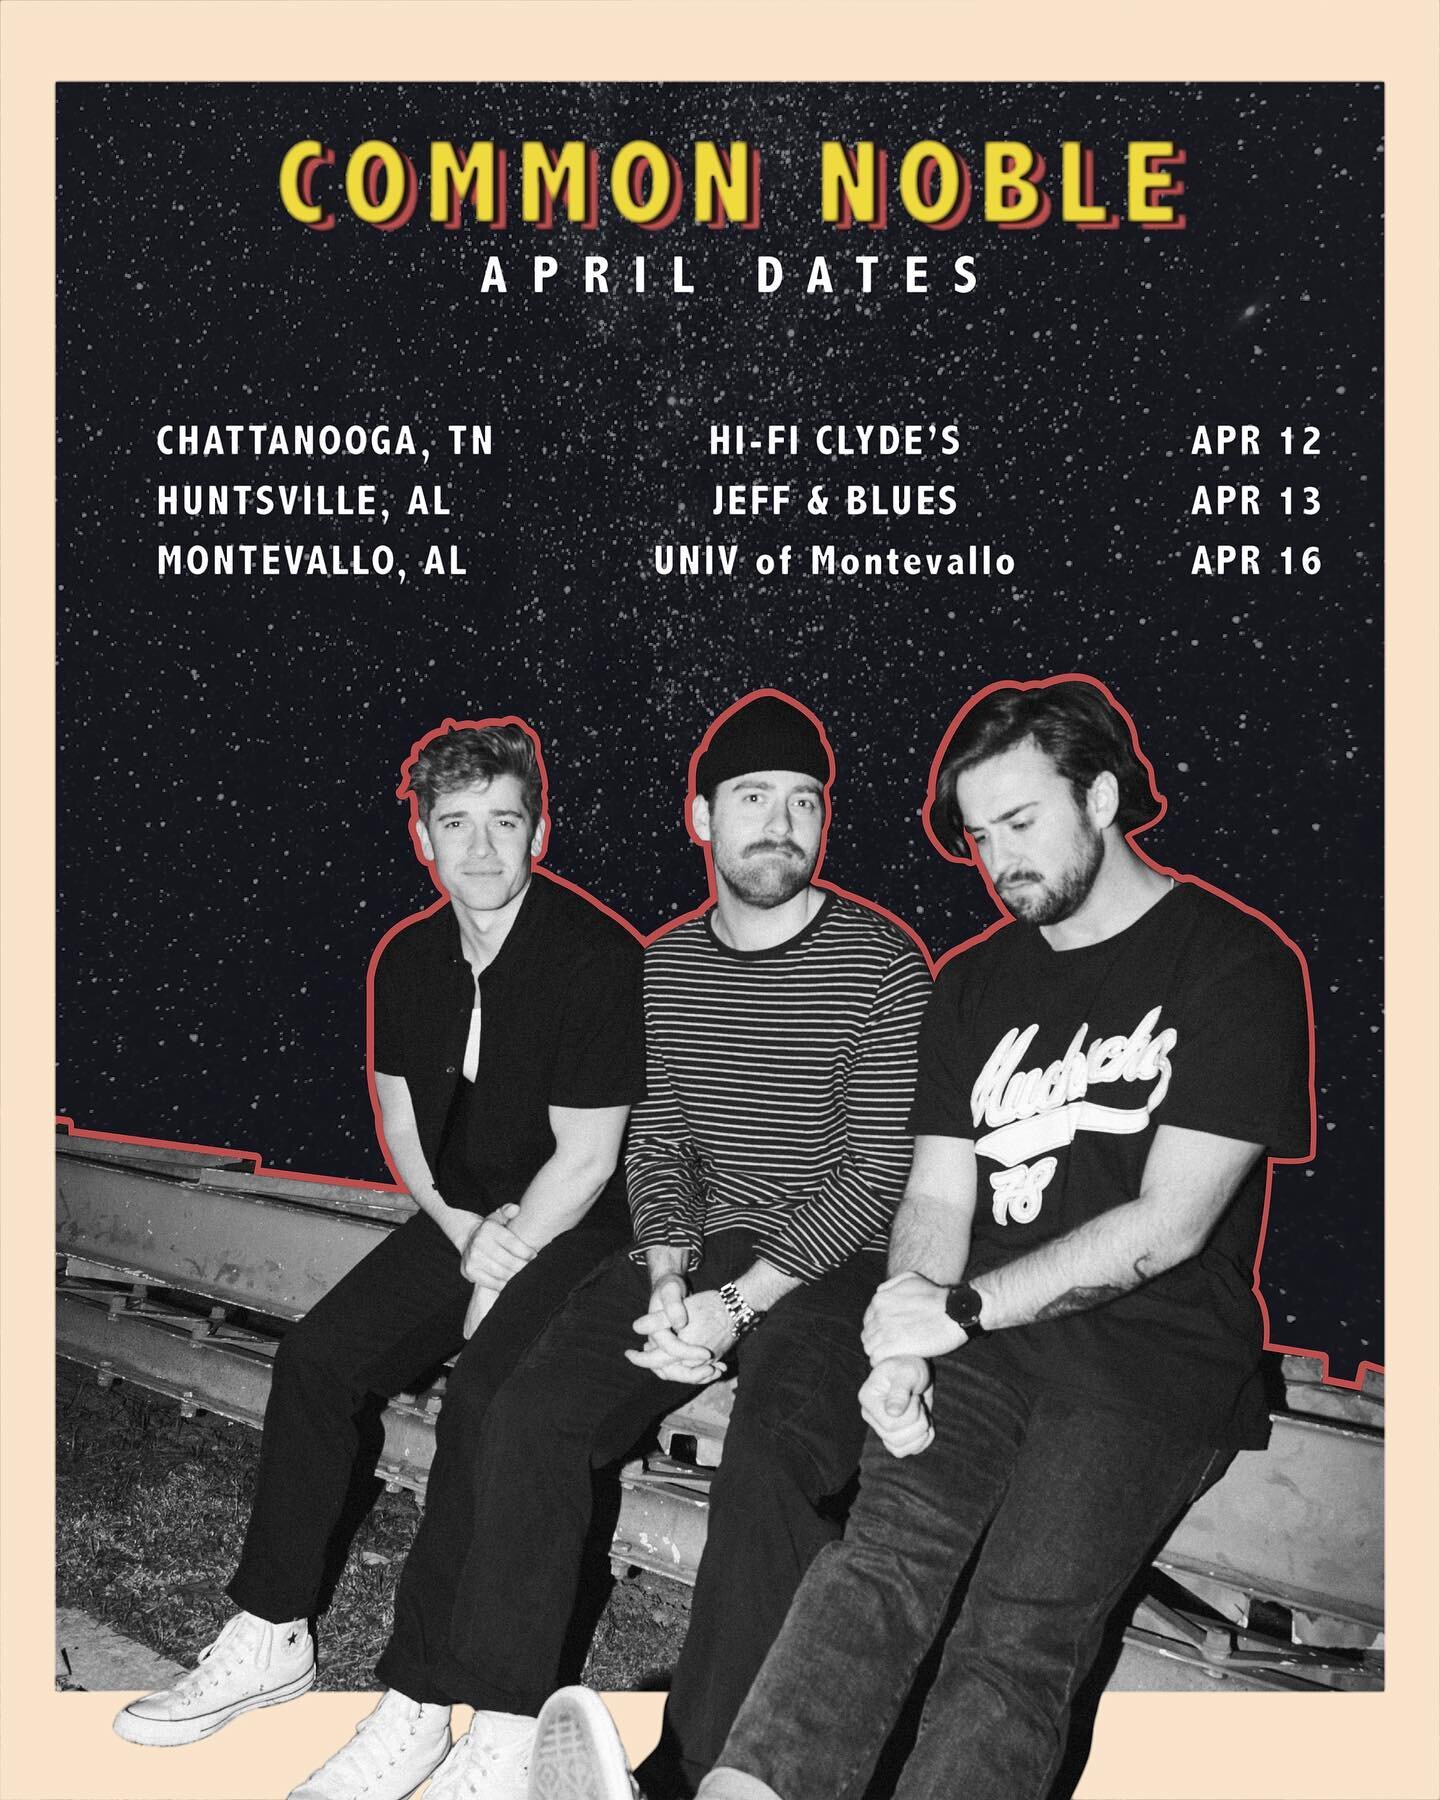 Couple more April dates to commission these warmer days! Couldn&rsquo;t be happier to be alive✌🏼

ALSO be sure to keep us in mind when building your windows-down playlists 🫶🏼